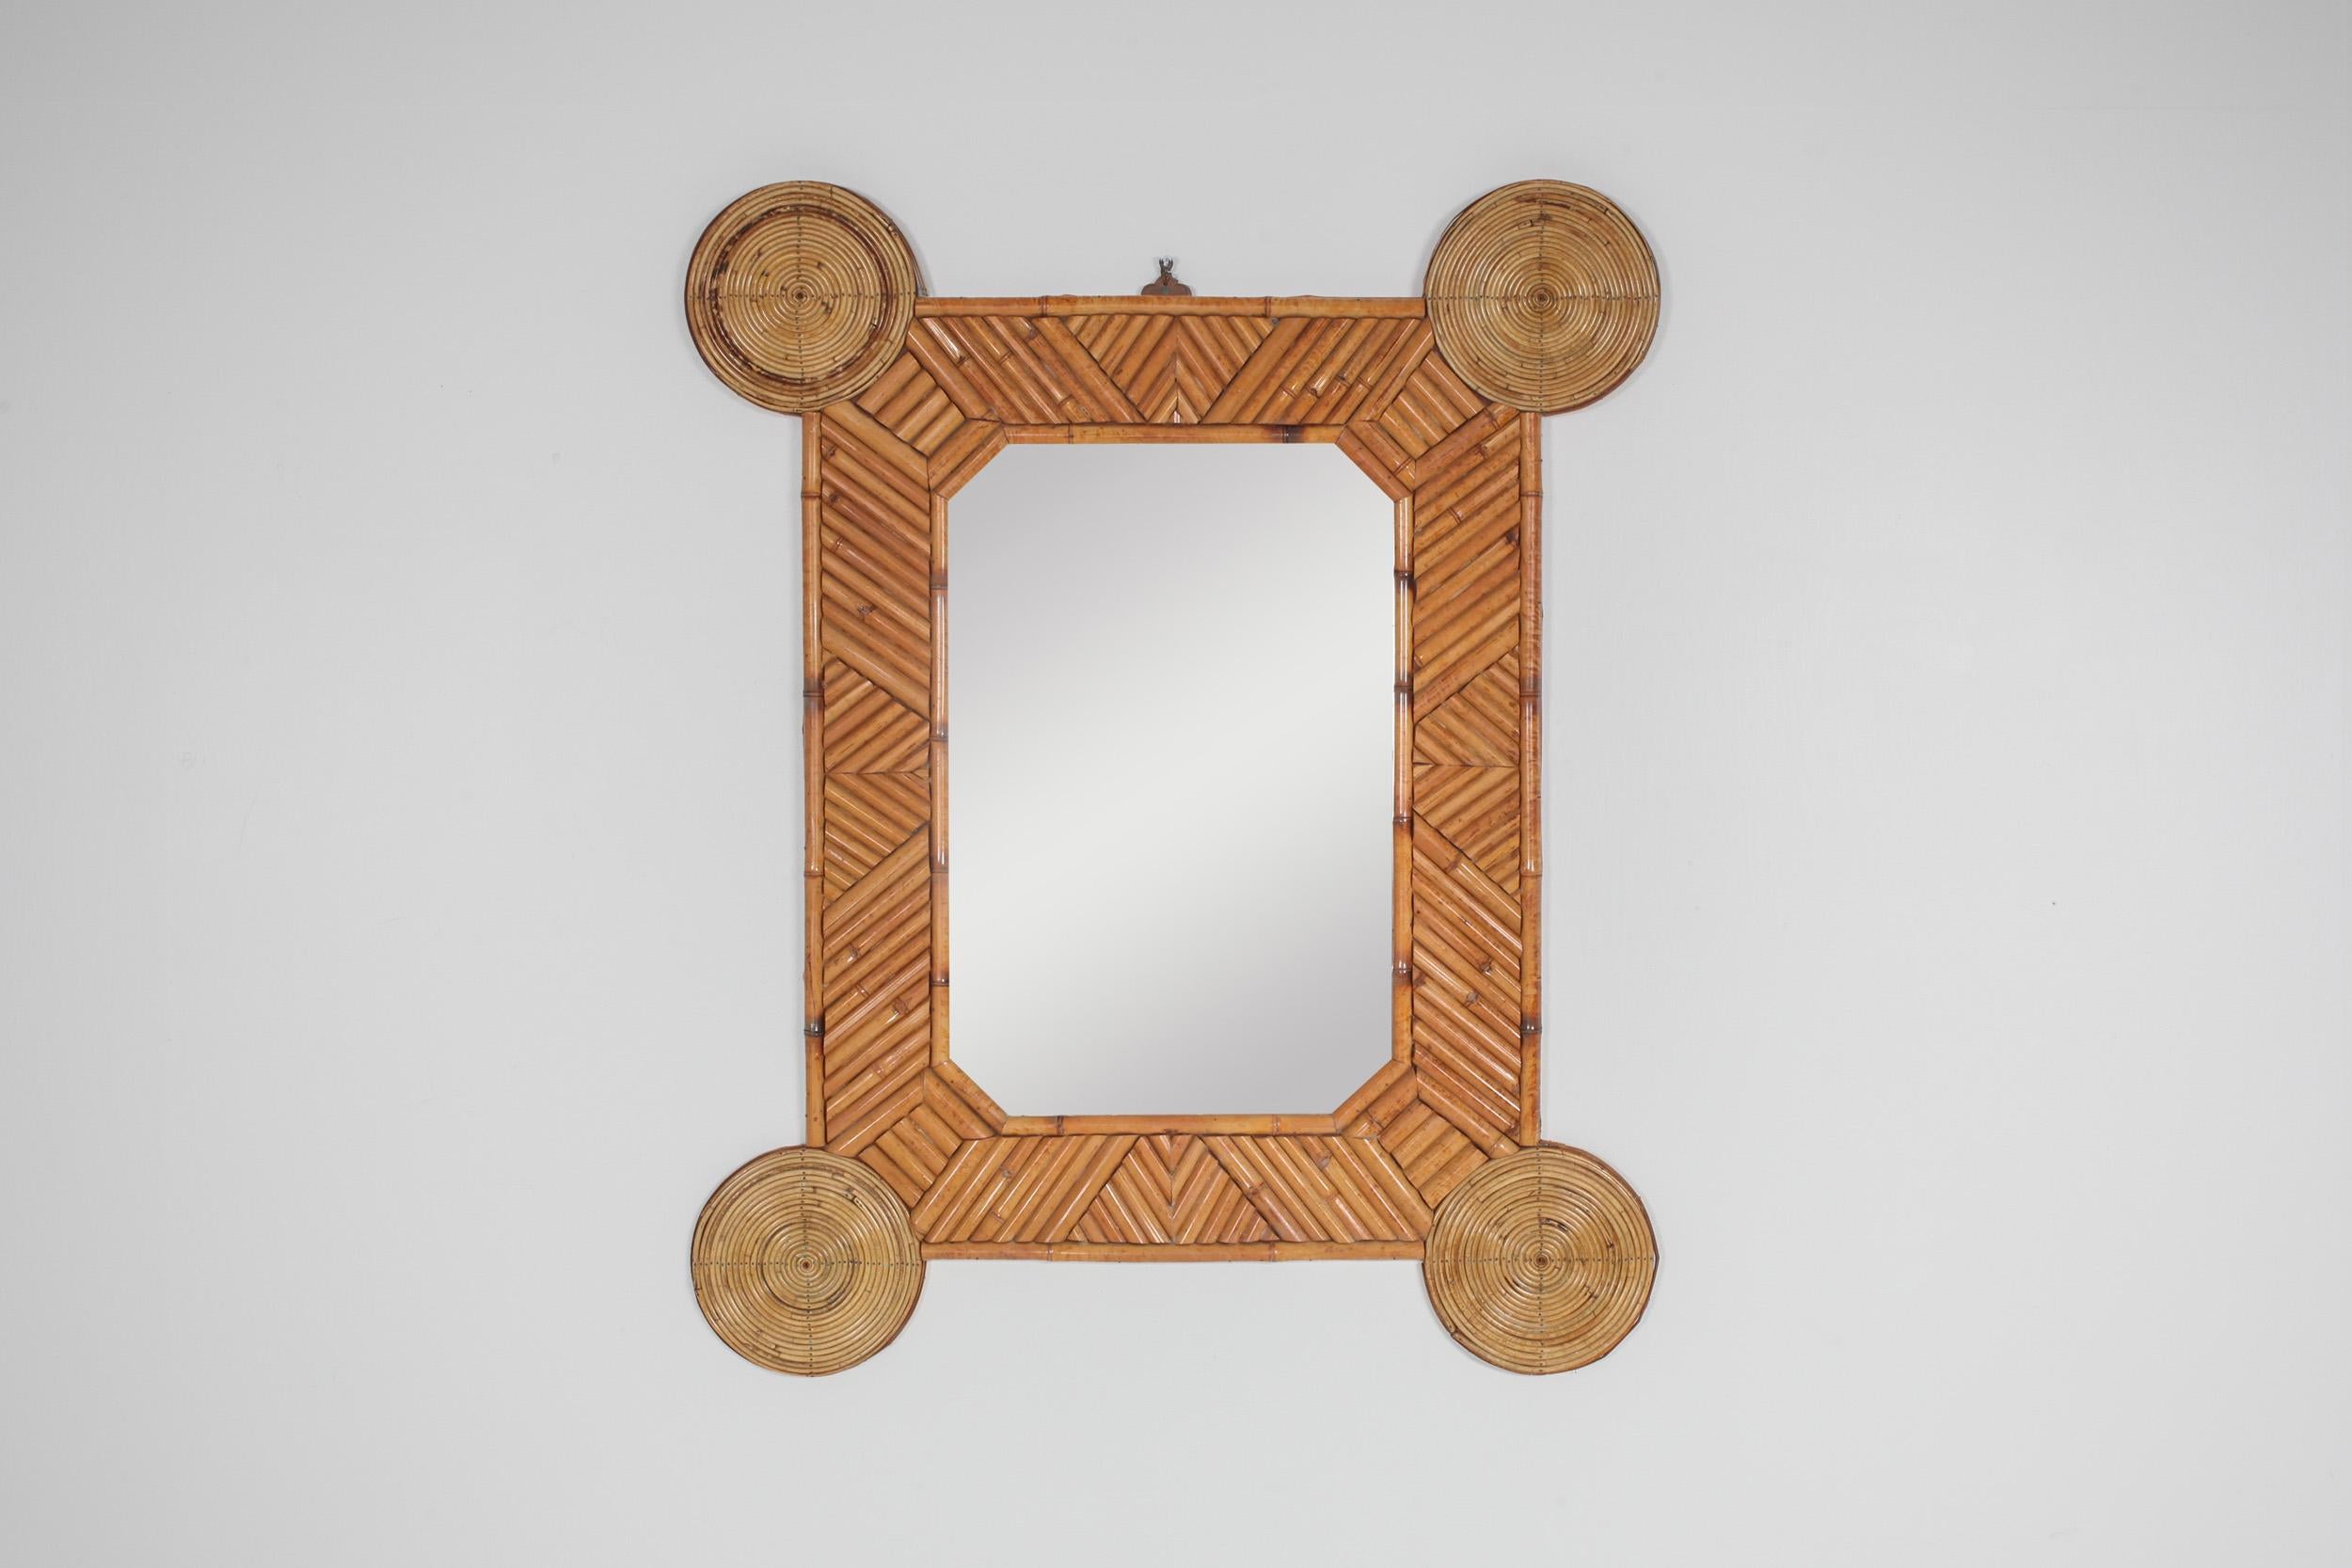 Tropicalist mirror, Arpex, Italy, 1970s

Vivai del sud, Gabriella Crespi and Arpex were the three leading design studios in 1970s Italy specialized in this high-end tropical glam style.
Arpex make great use of geometric patterns to create a